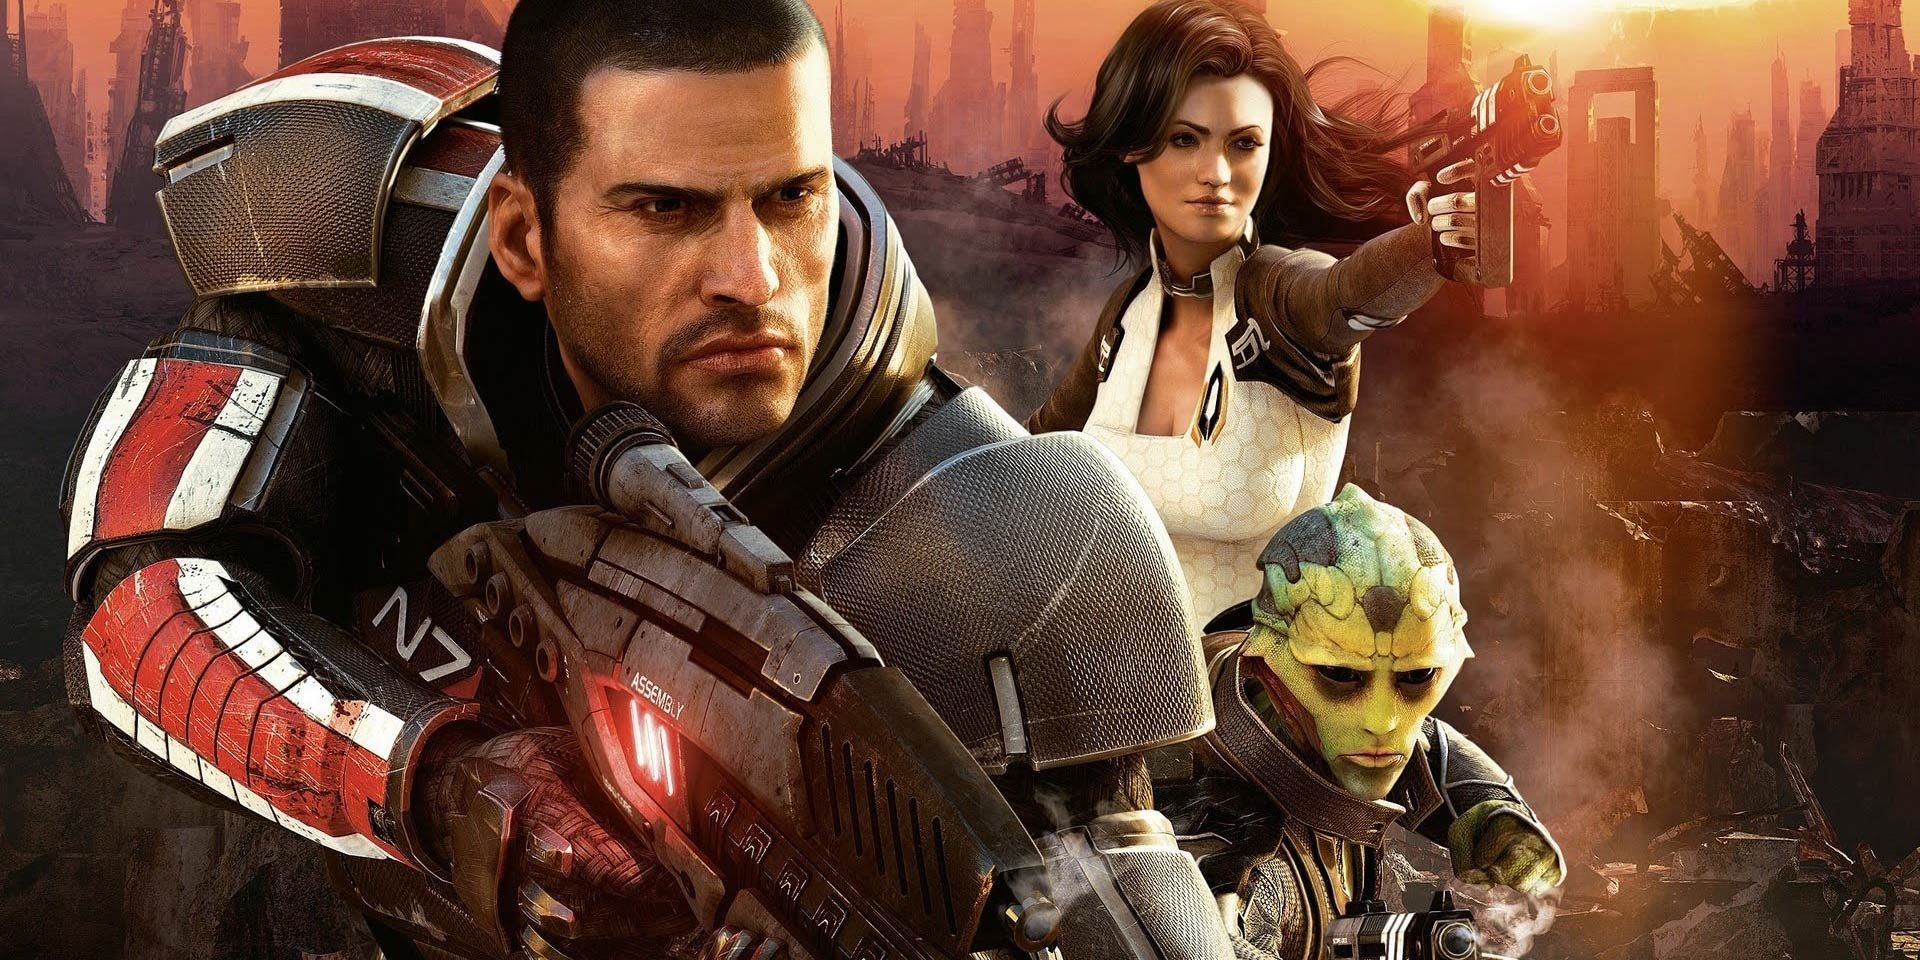 Commander Shepard, Miranda Lawson, and Than Krios posing together in a promotional image for Mass Effect 2.